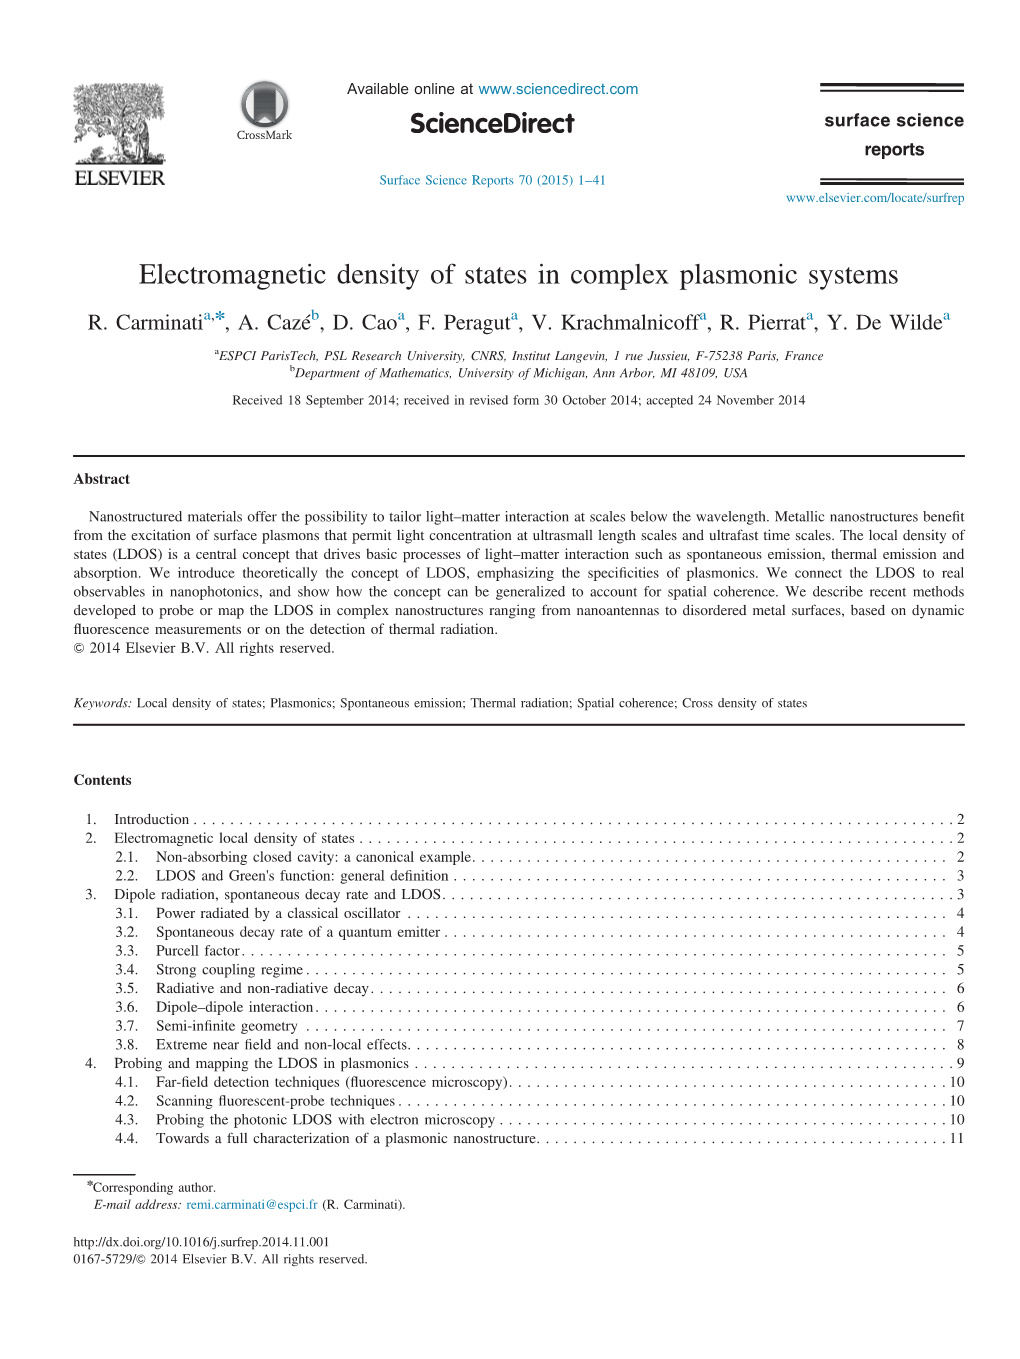 Electromagnetic Density of States in Complex Plasmonic Systems